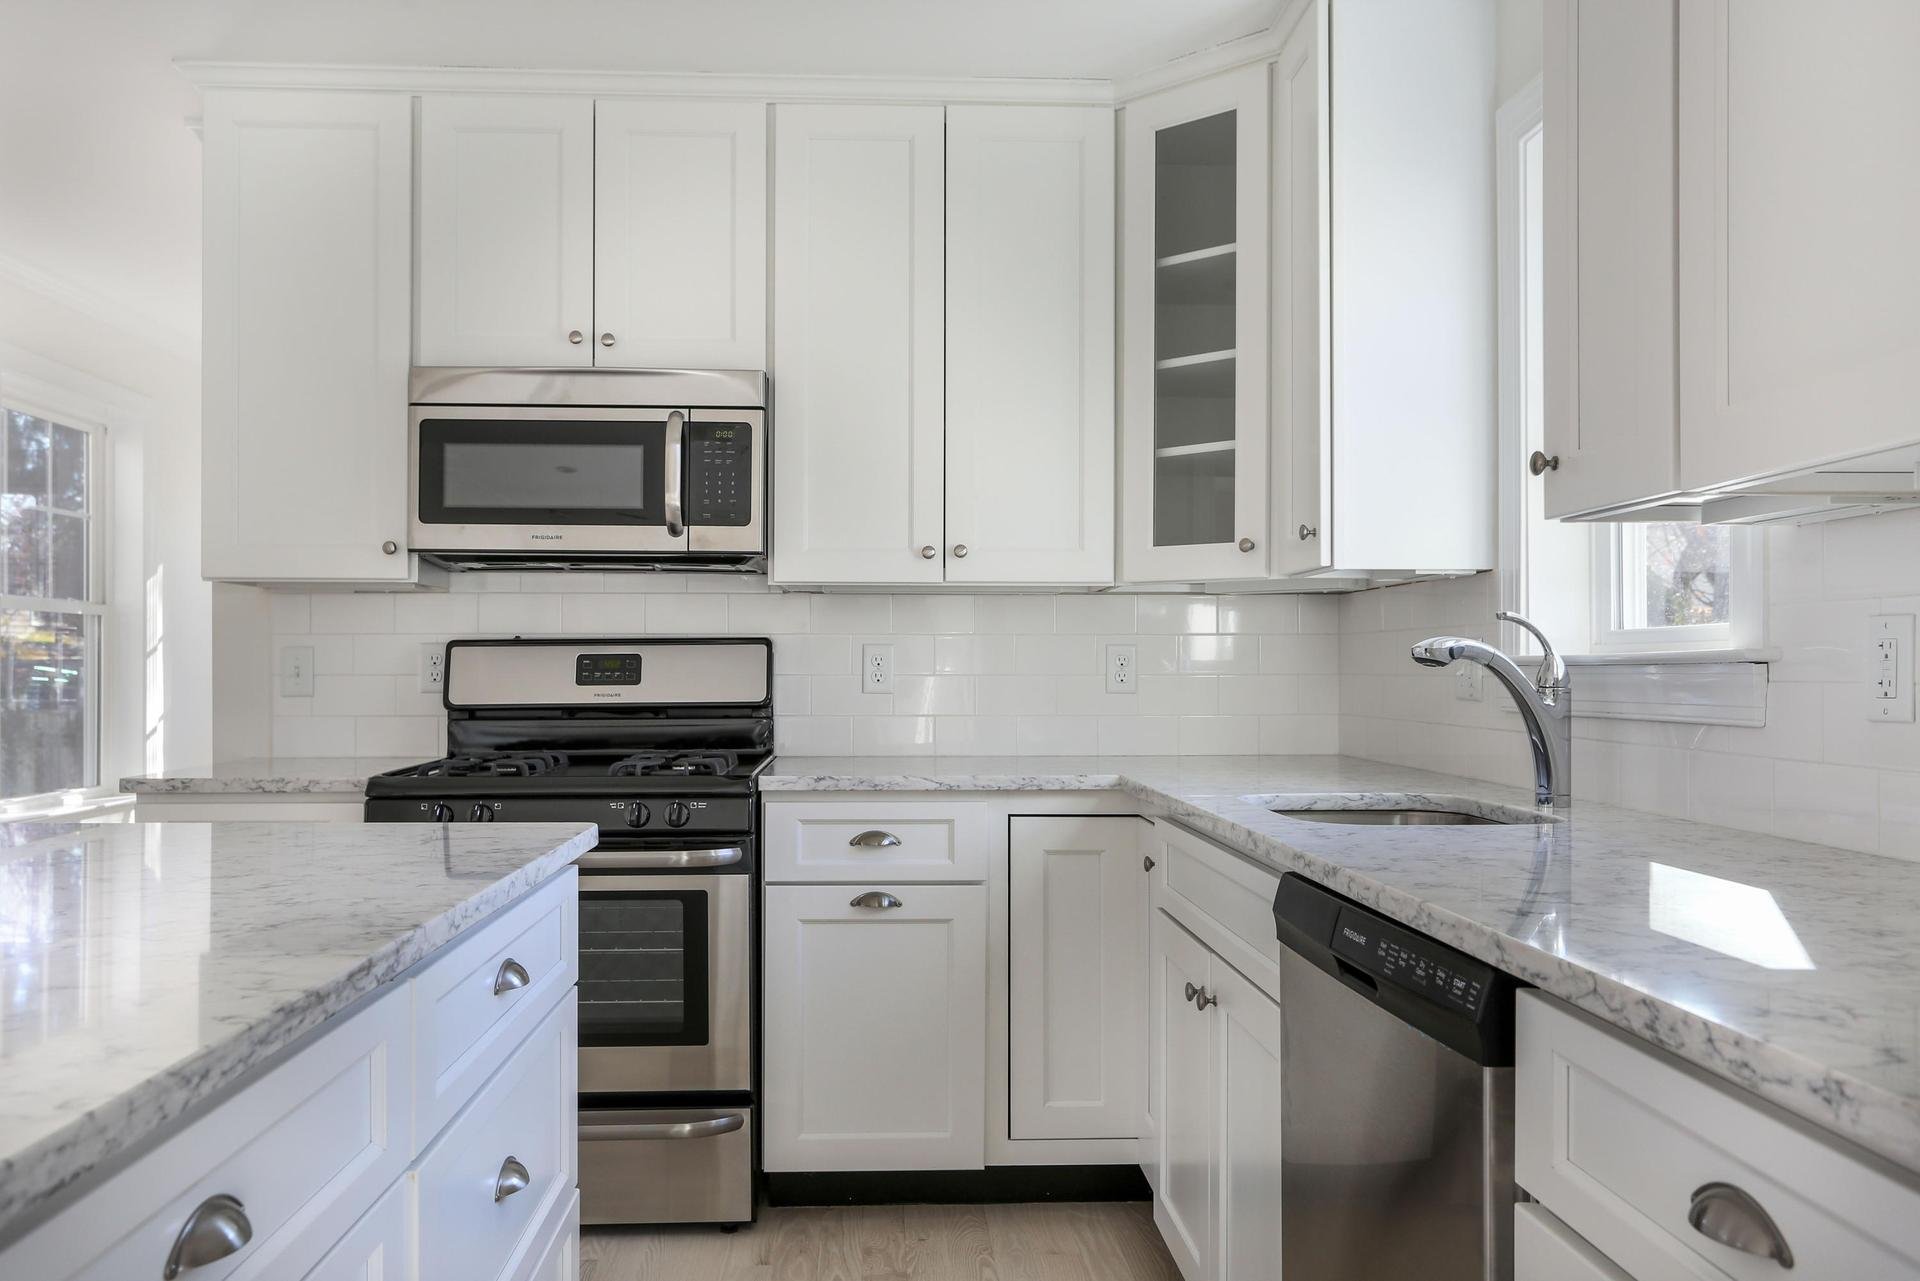 Stainless steel appliances and silver hardware in white kitchen.jpeg